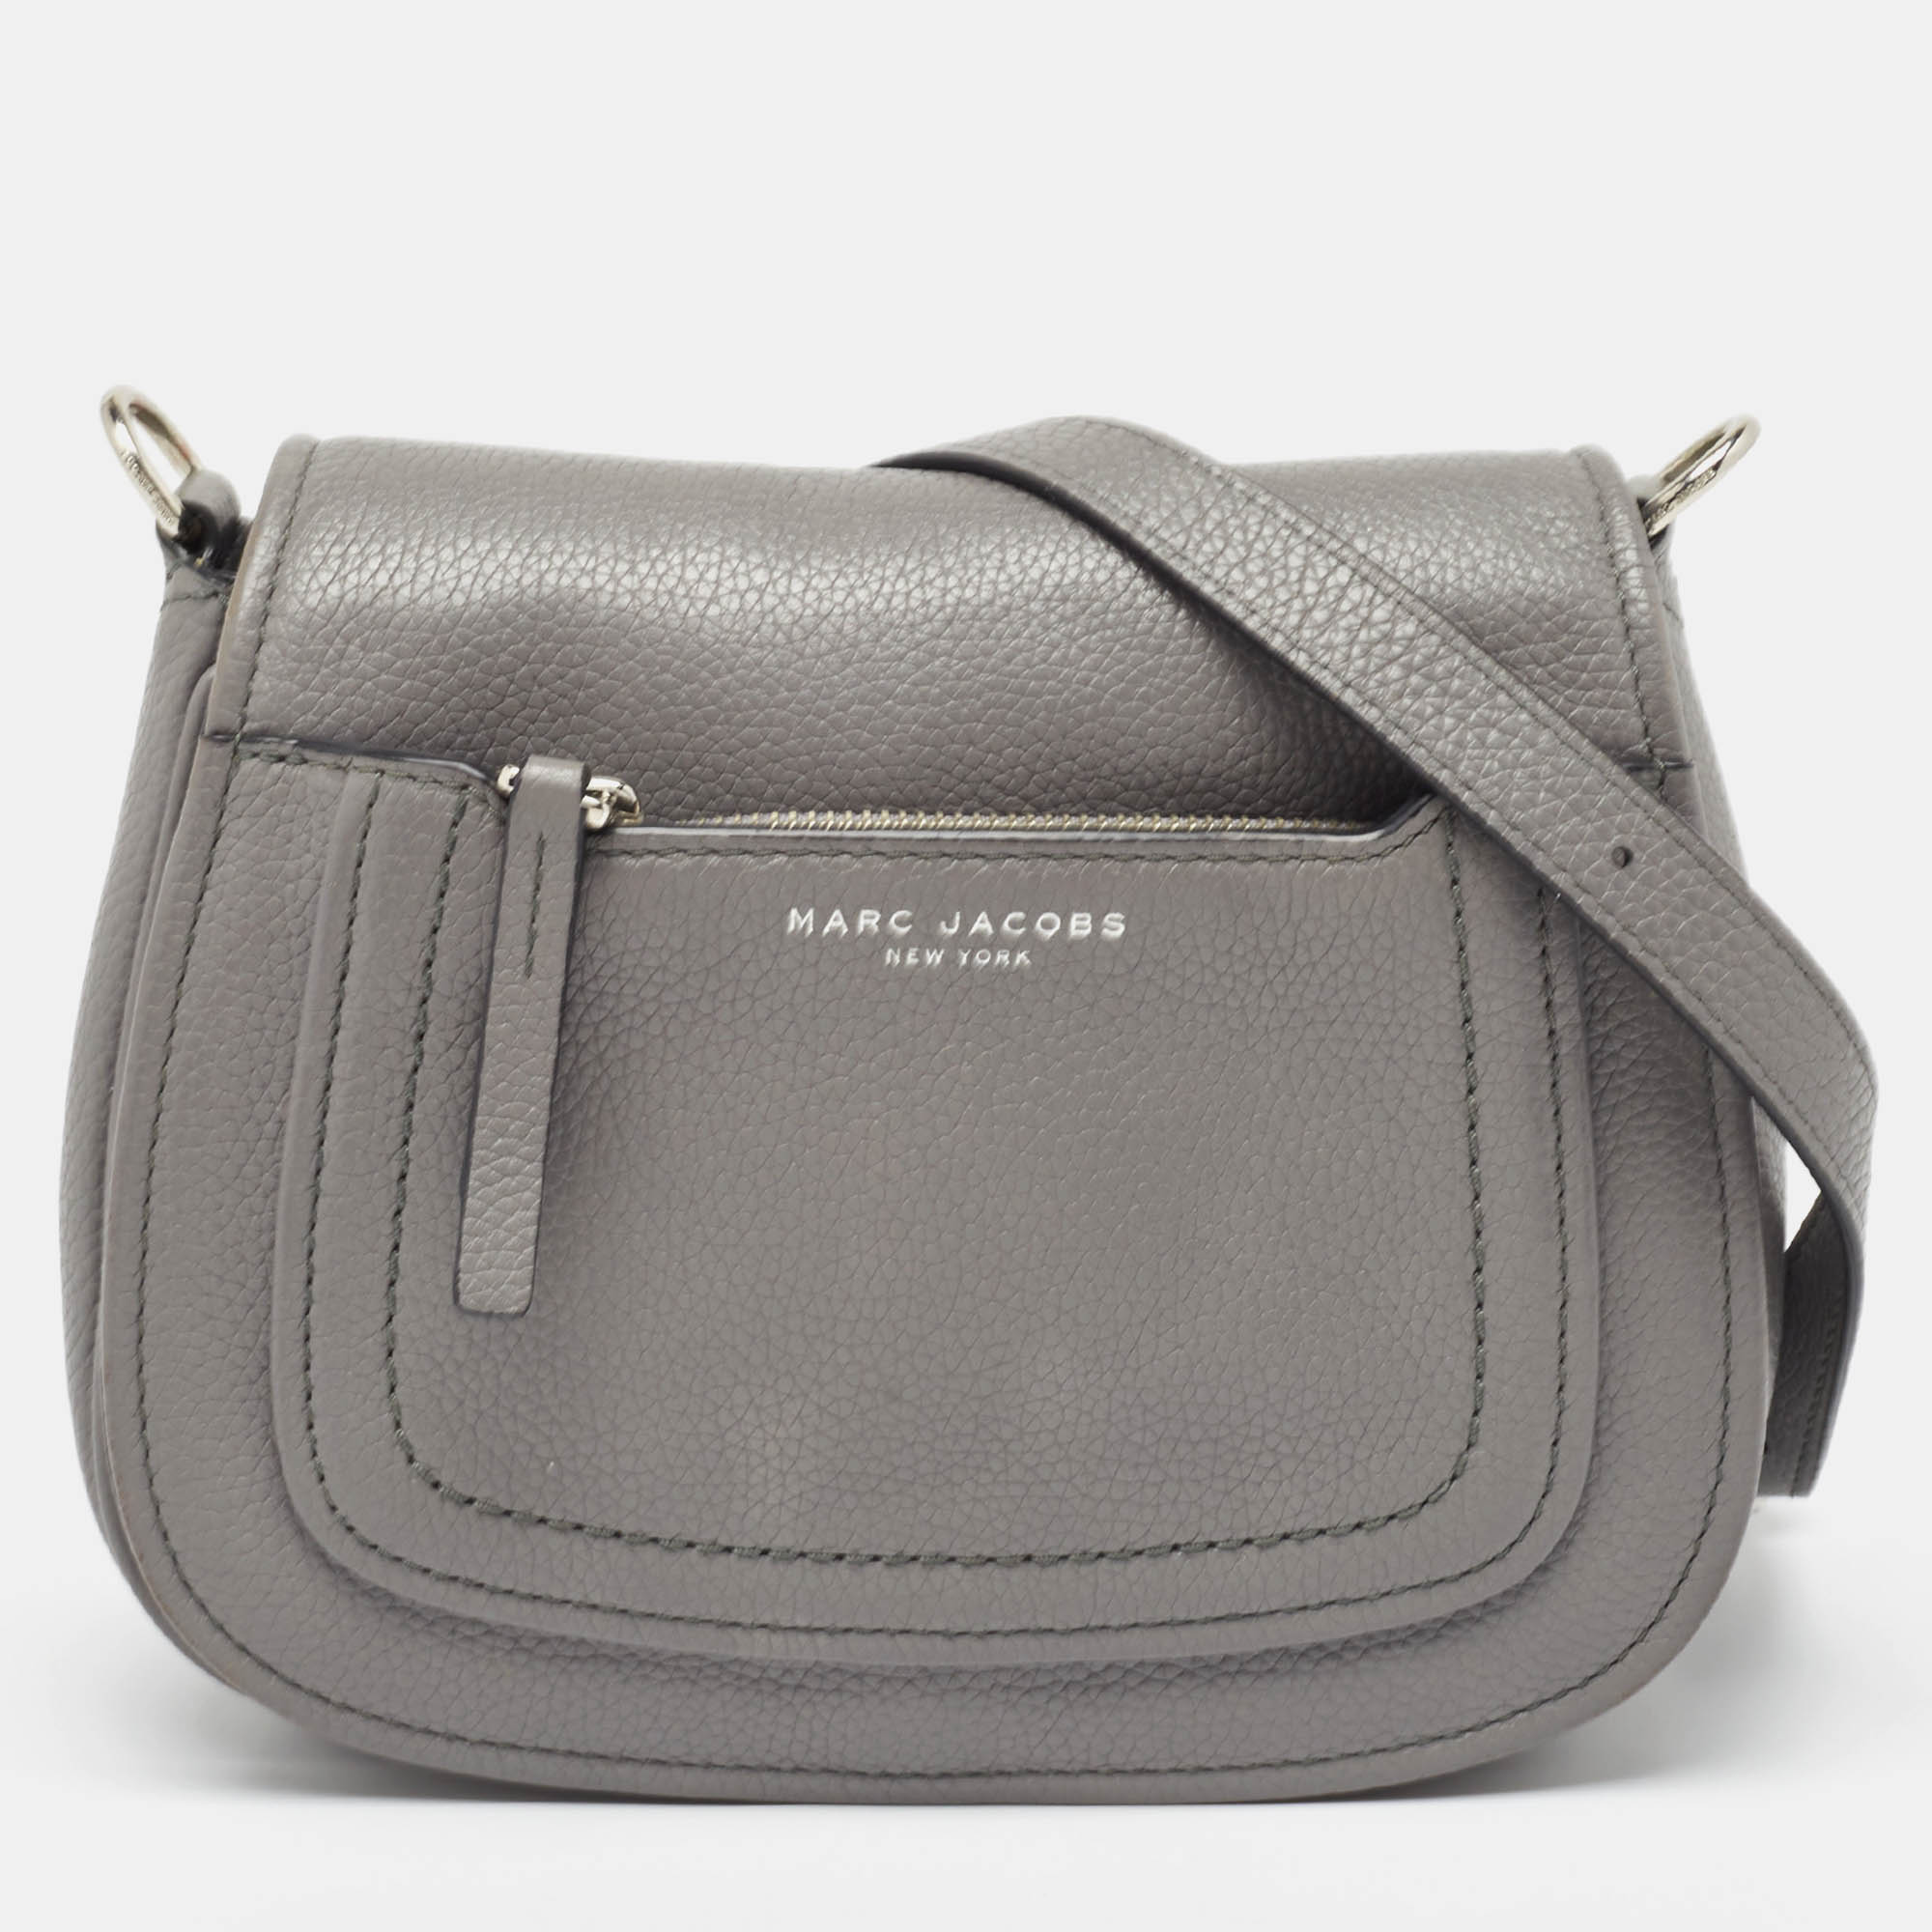 Pre-owned Marc Jacobs Grey Leather Empire City Crossbody Bag